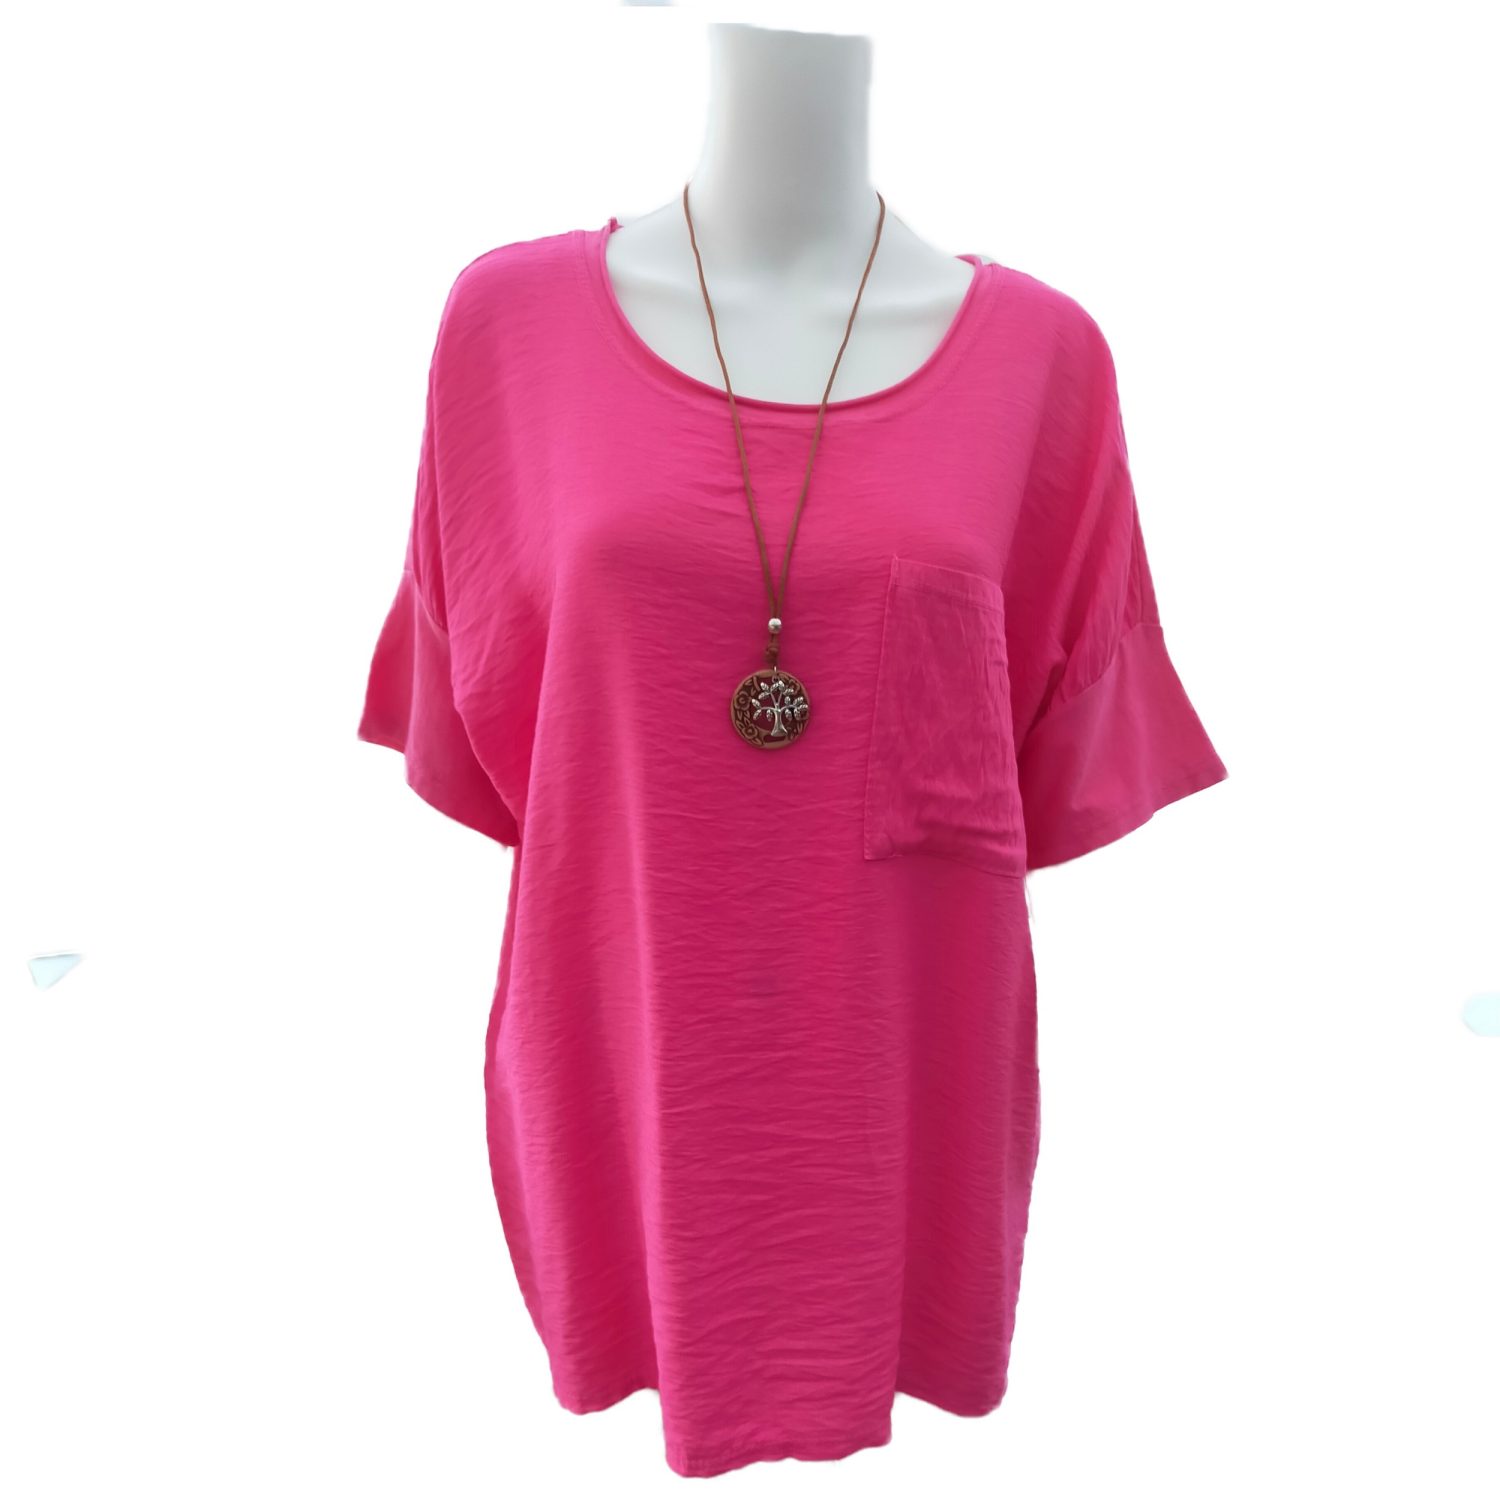 pink scoop neck tshirt top with breast pocket front view